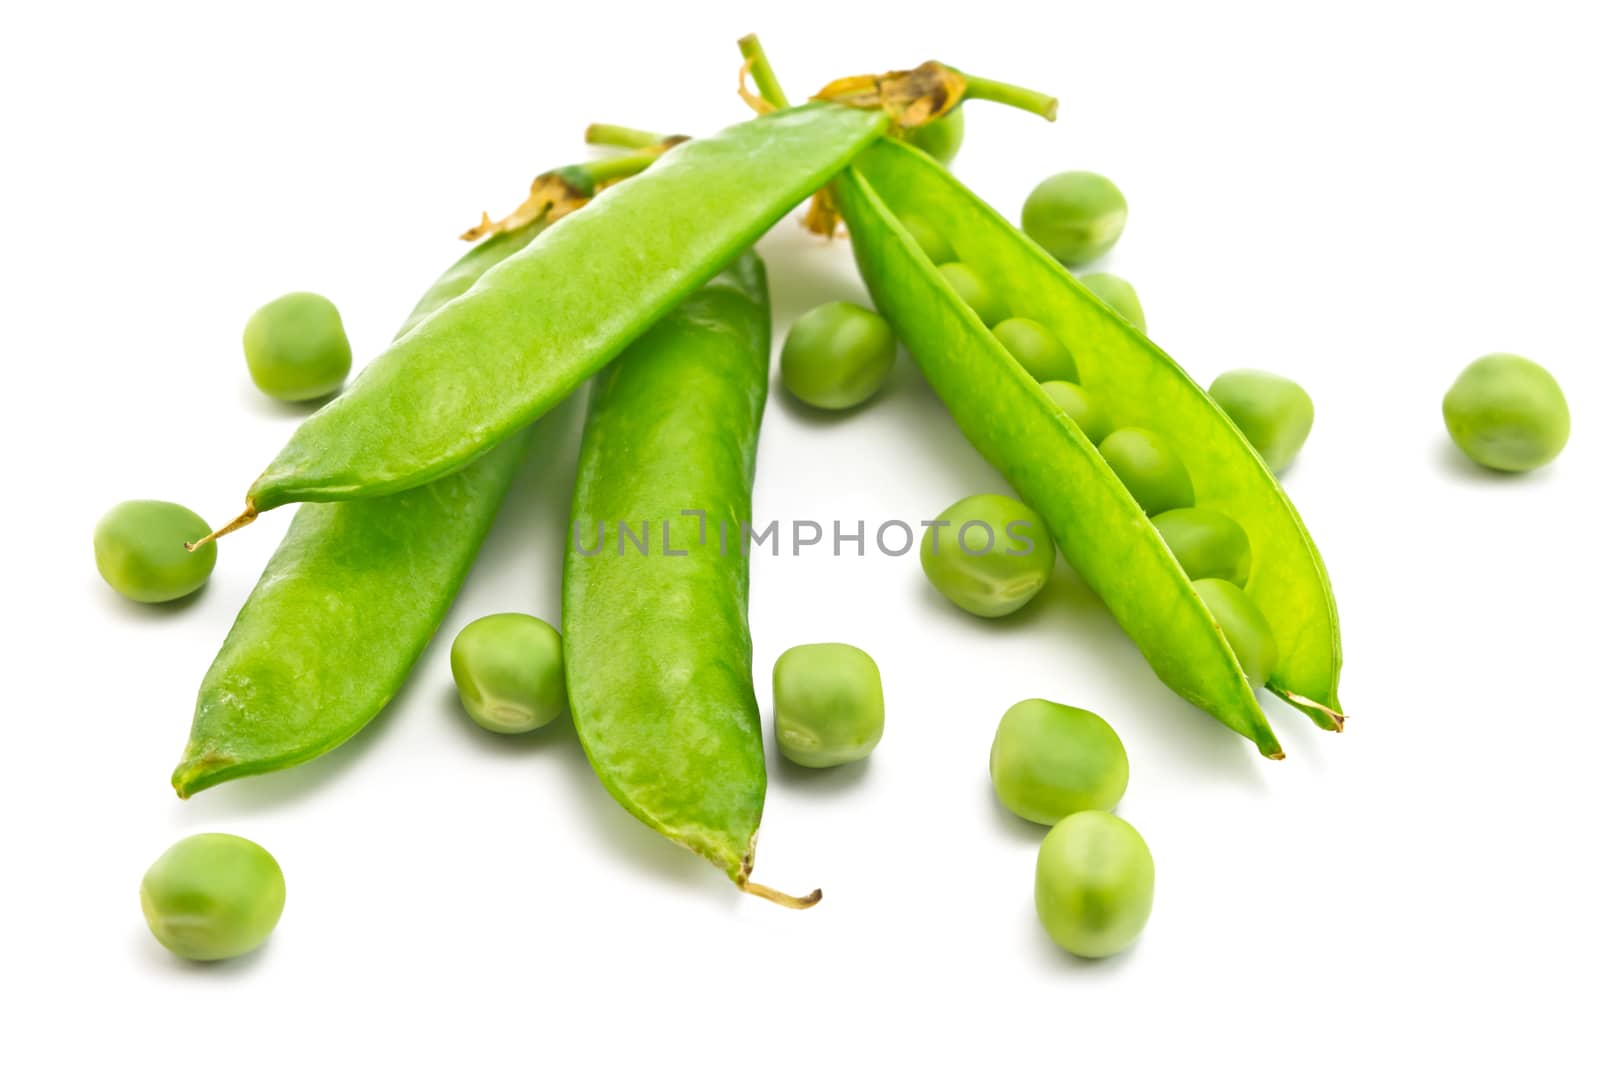 pods of green peas and some peas on a white background